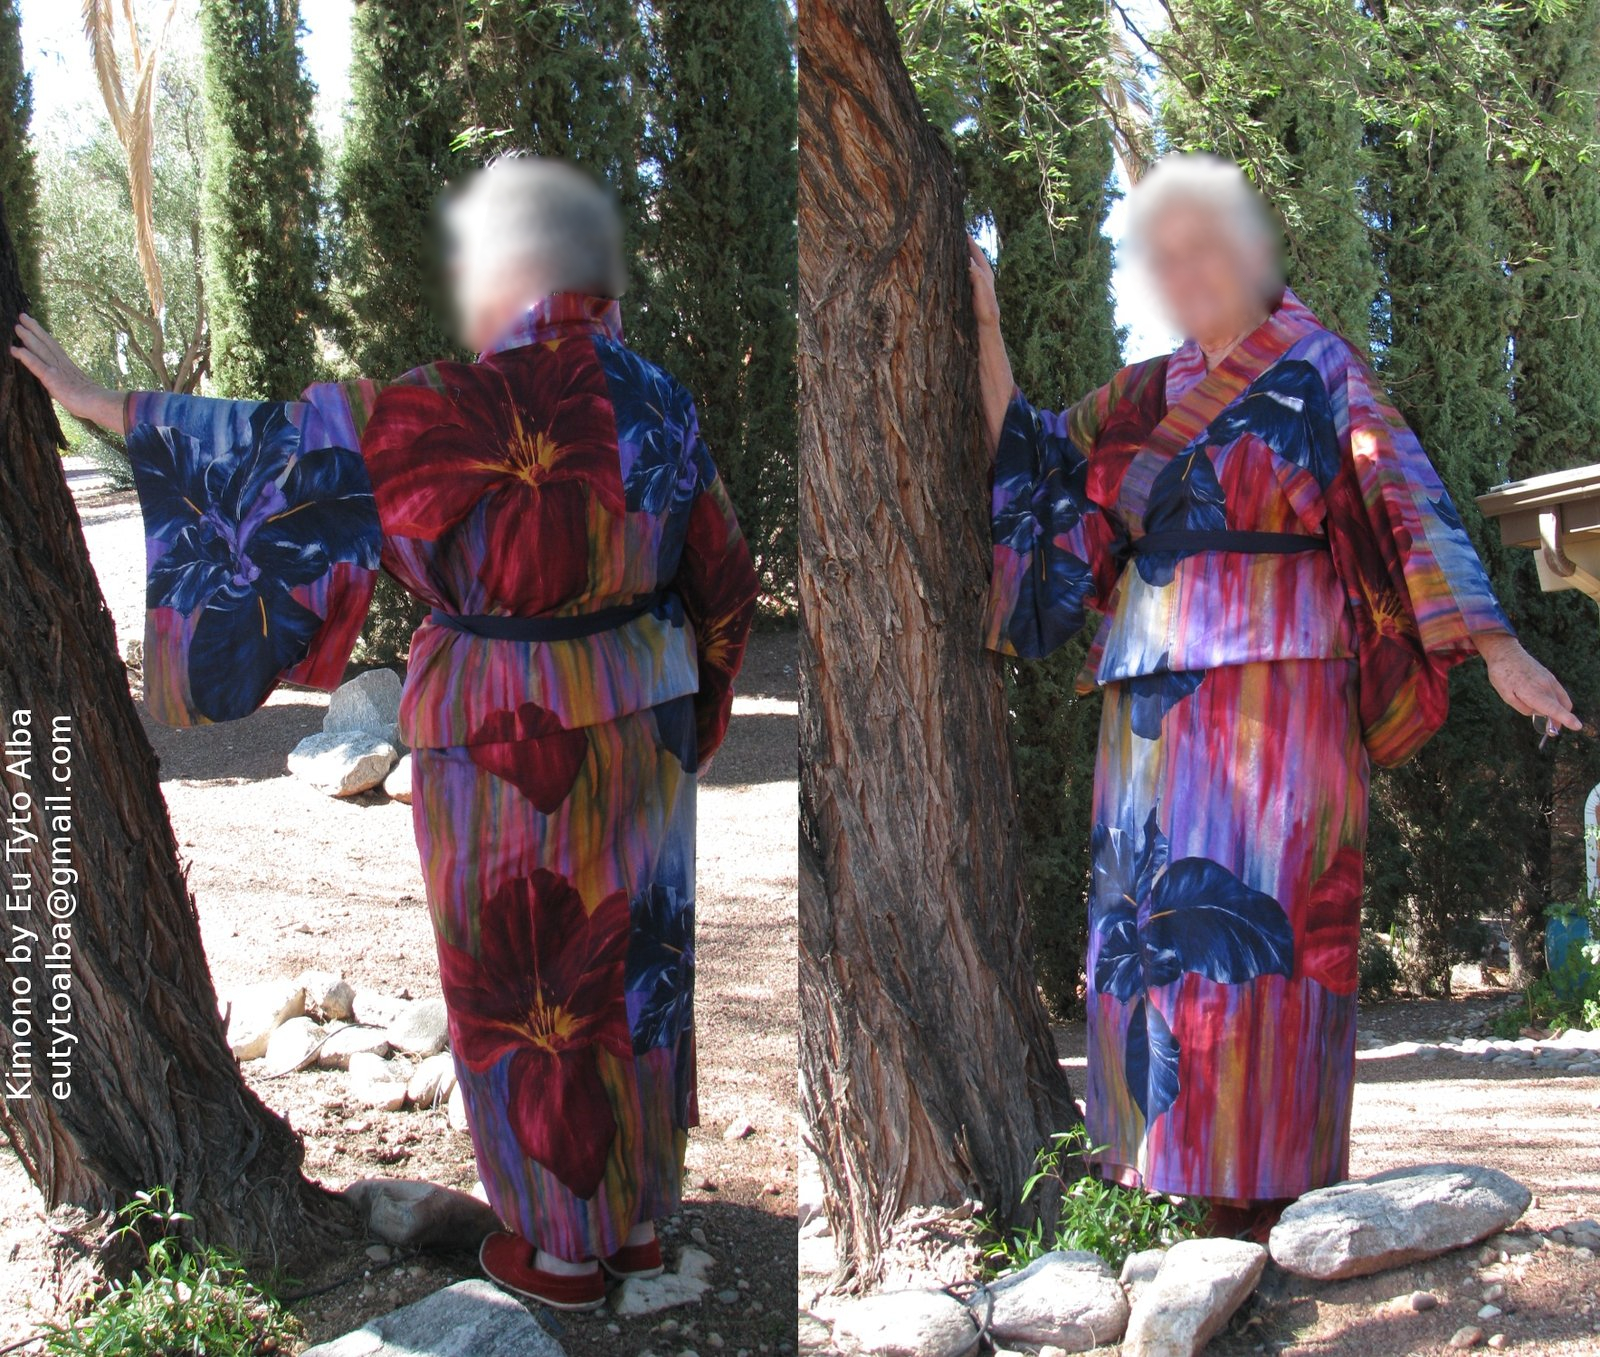 The orchid patterned yukata that I made for my grandmother. Since we live in Arizona and she loves the southwest, we used a patterned cotton fabric with southwestern colors.